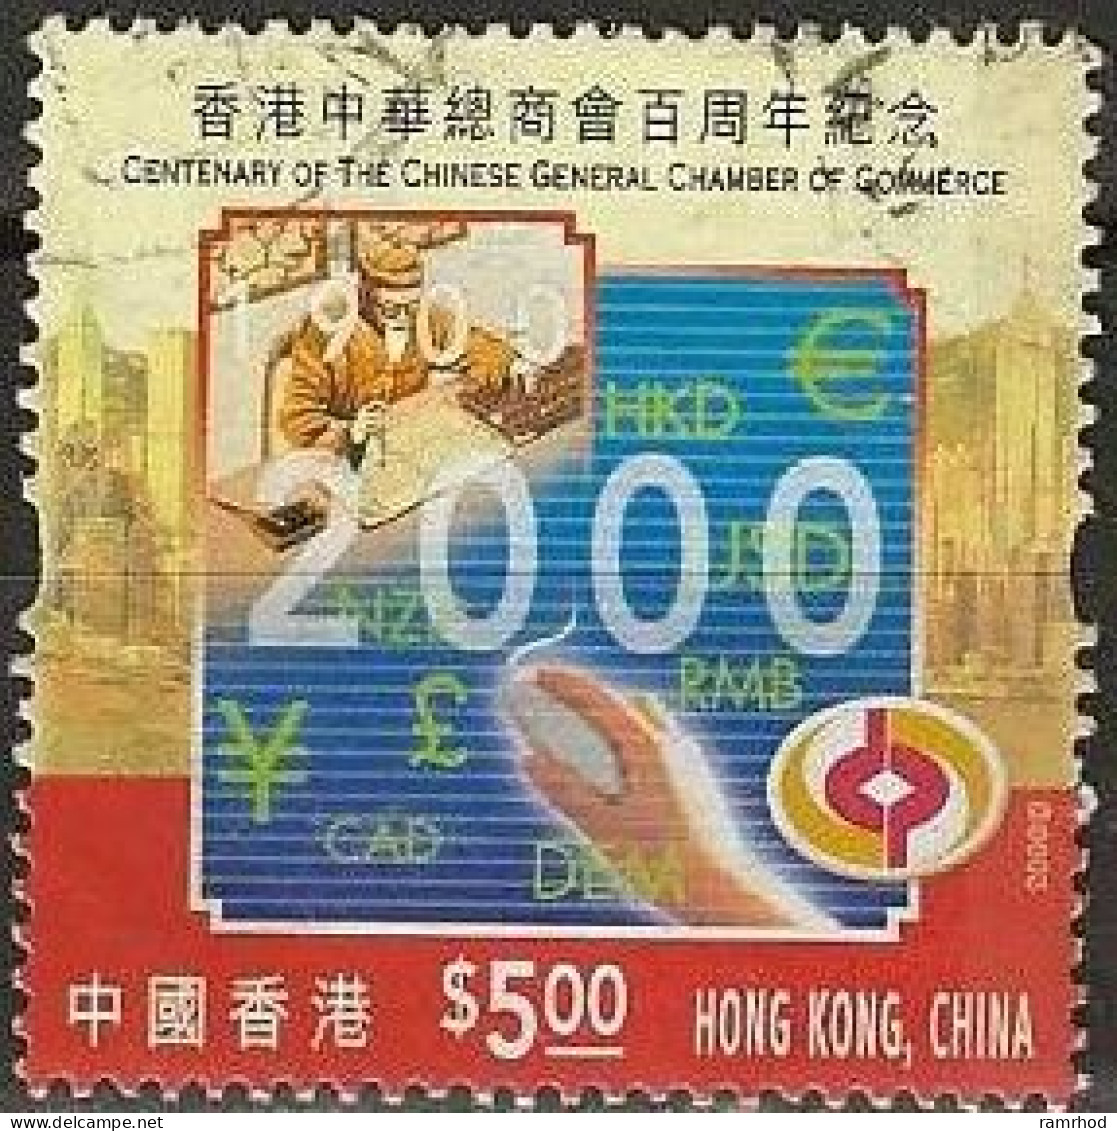 HONG KONG 2000 Centenary Of General Chamber Of Commerce - $5 - Man Using Abacus And Hand Using Mouse FU - Usati